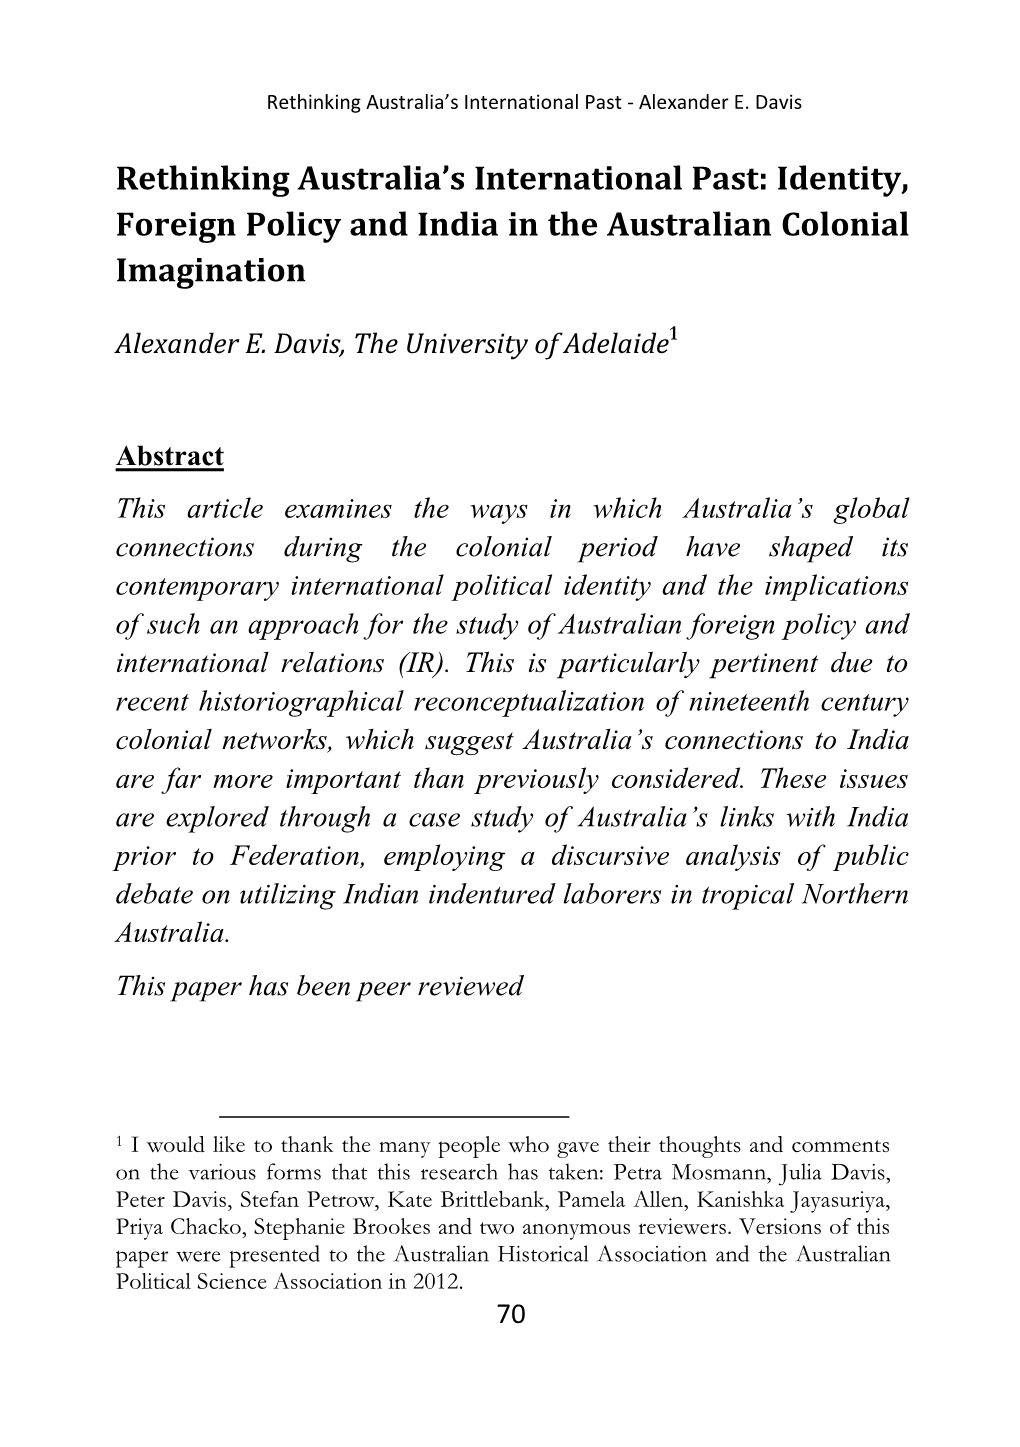 Identity, Foreign Policy and India in the Australian Colonial Imagination